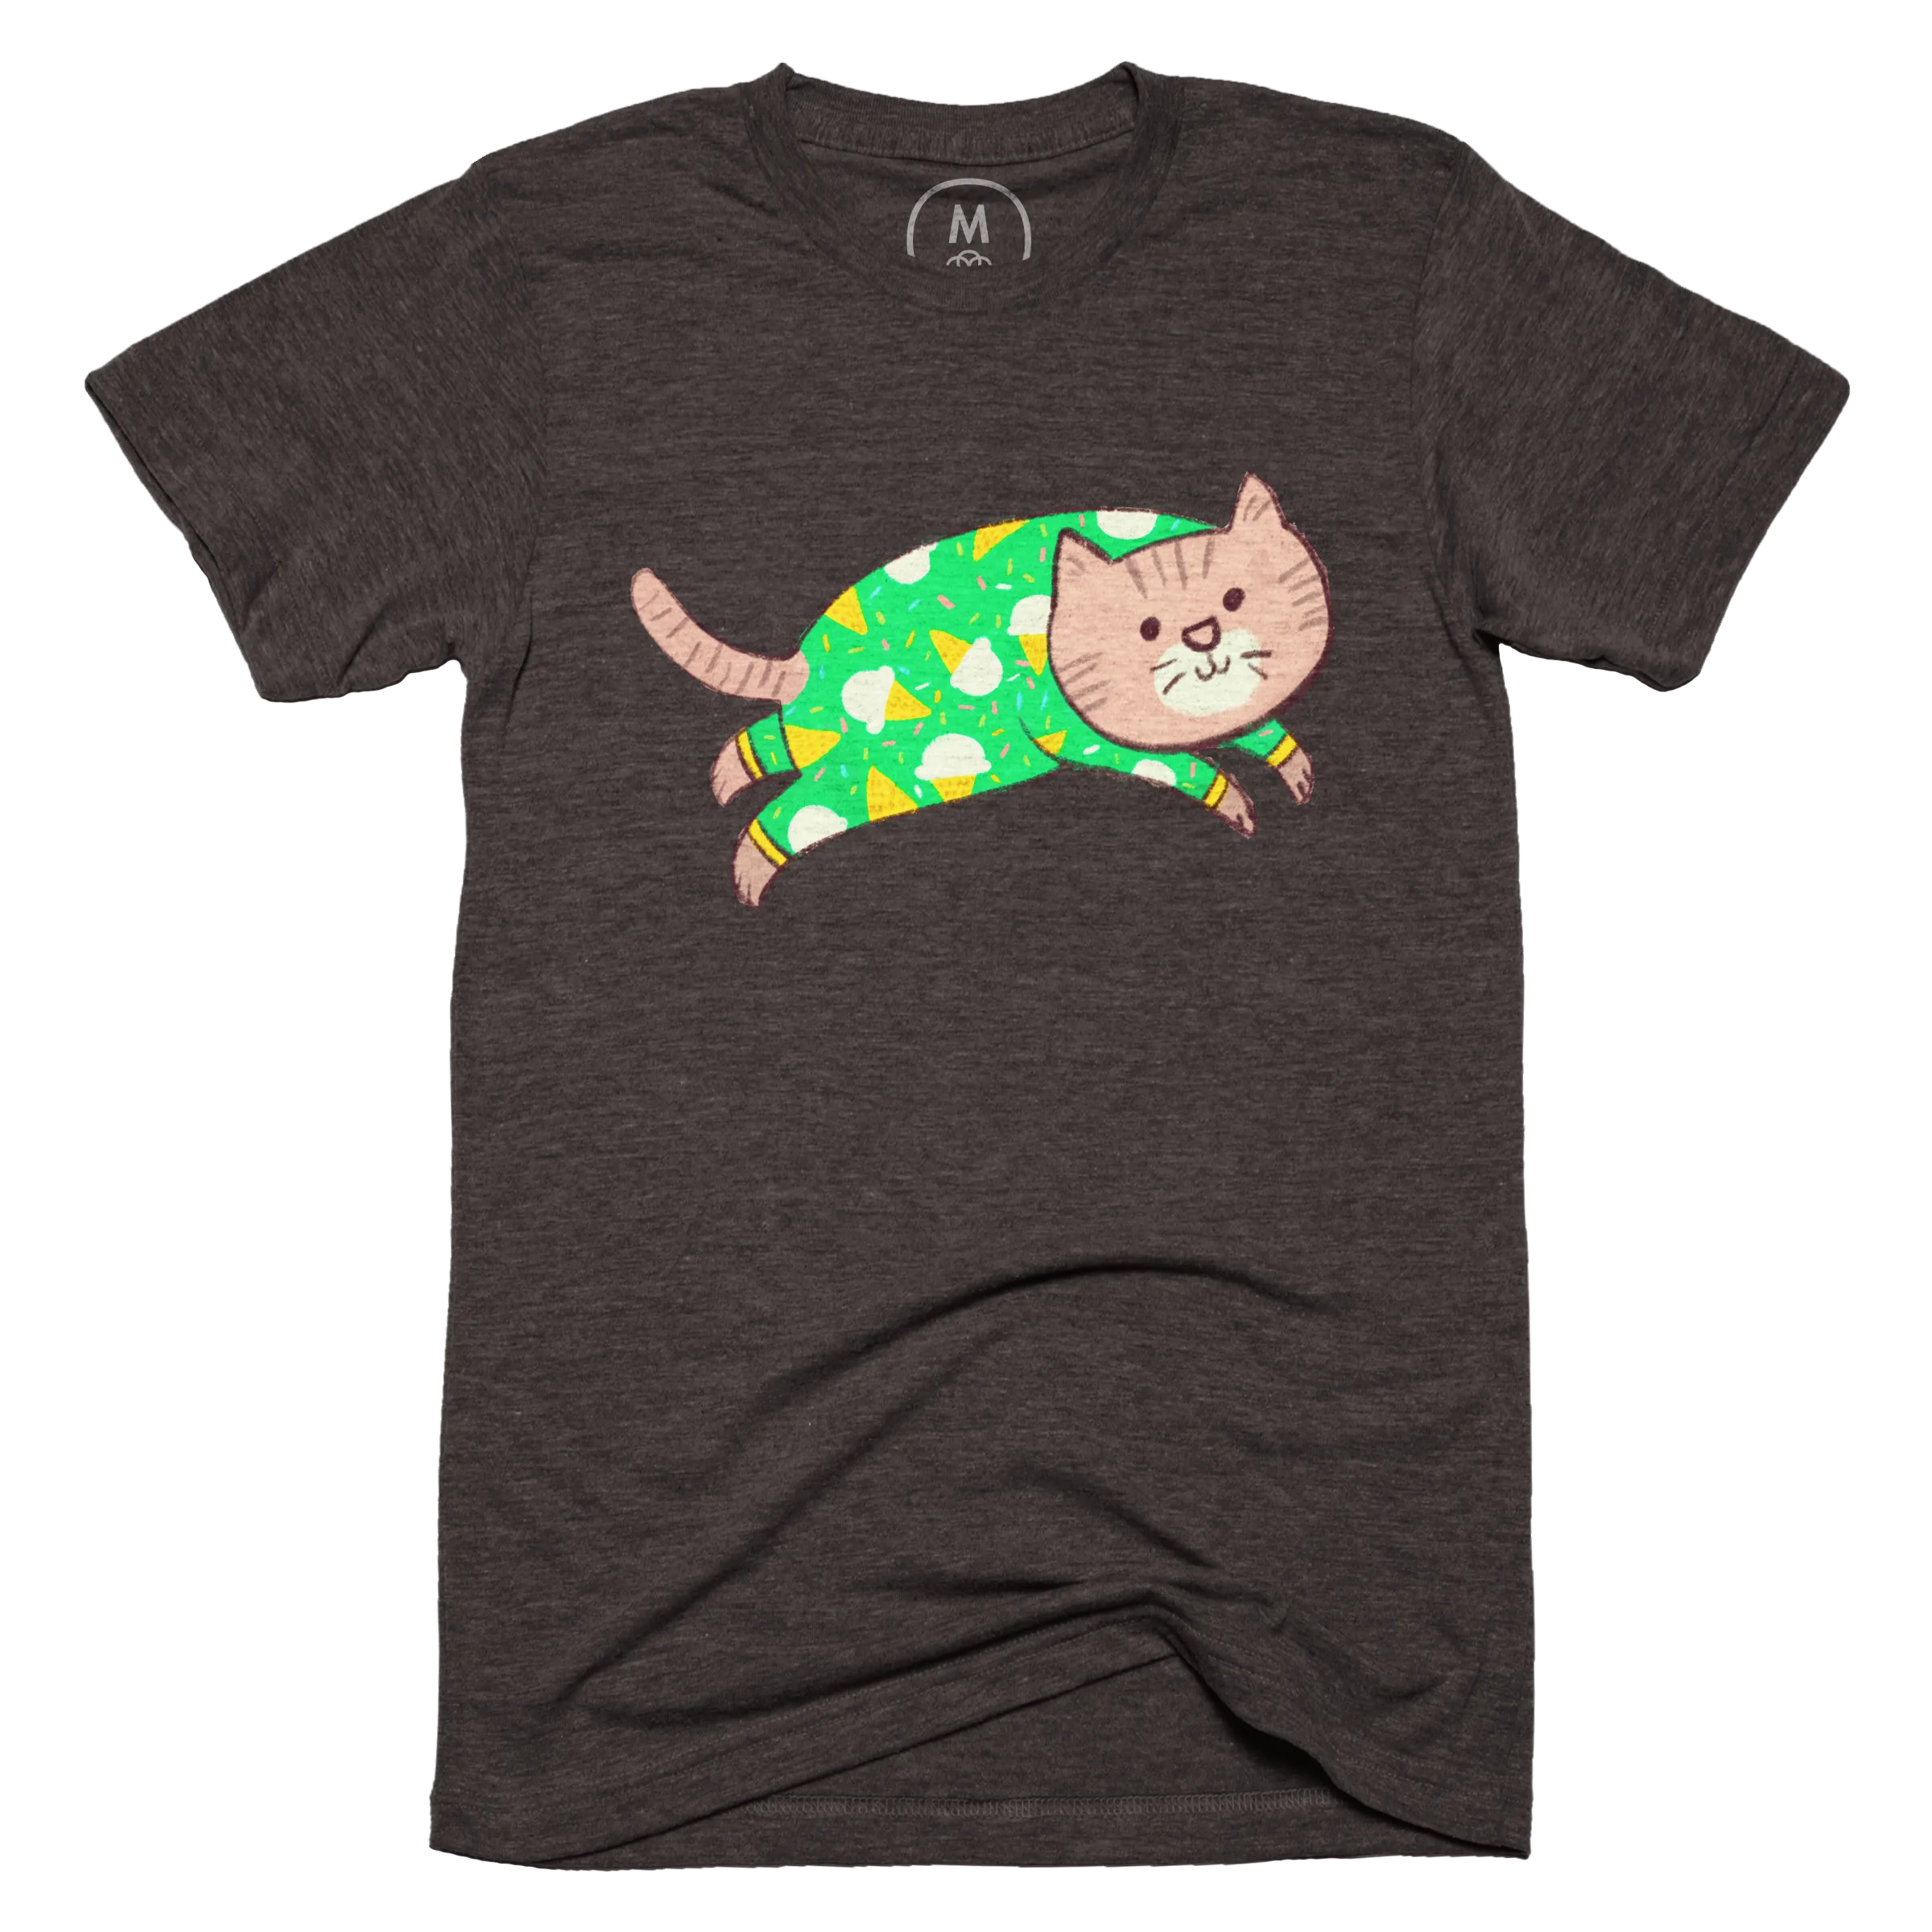 Cat's Pajamas” graphic tee, pullover crewneck, tank, and onesie by